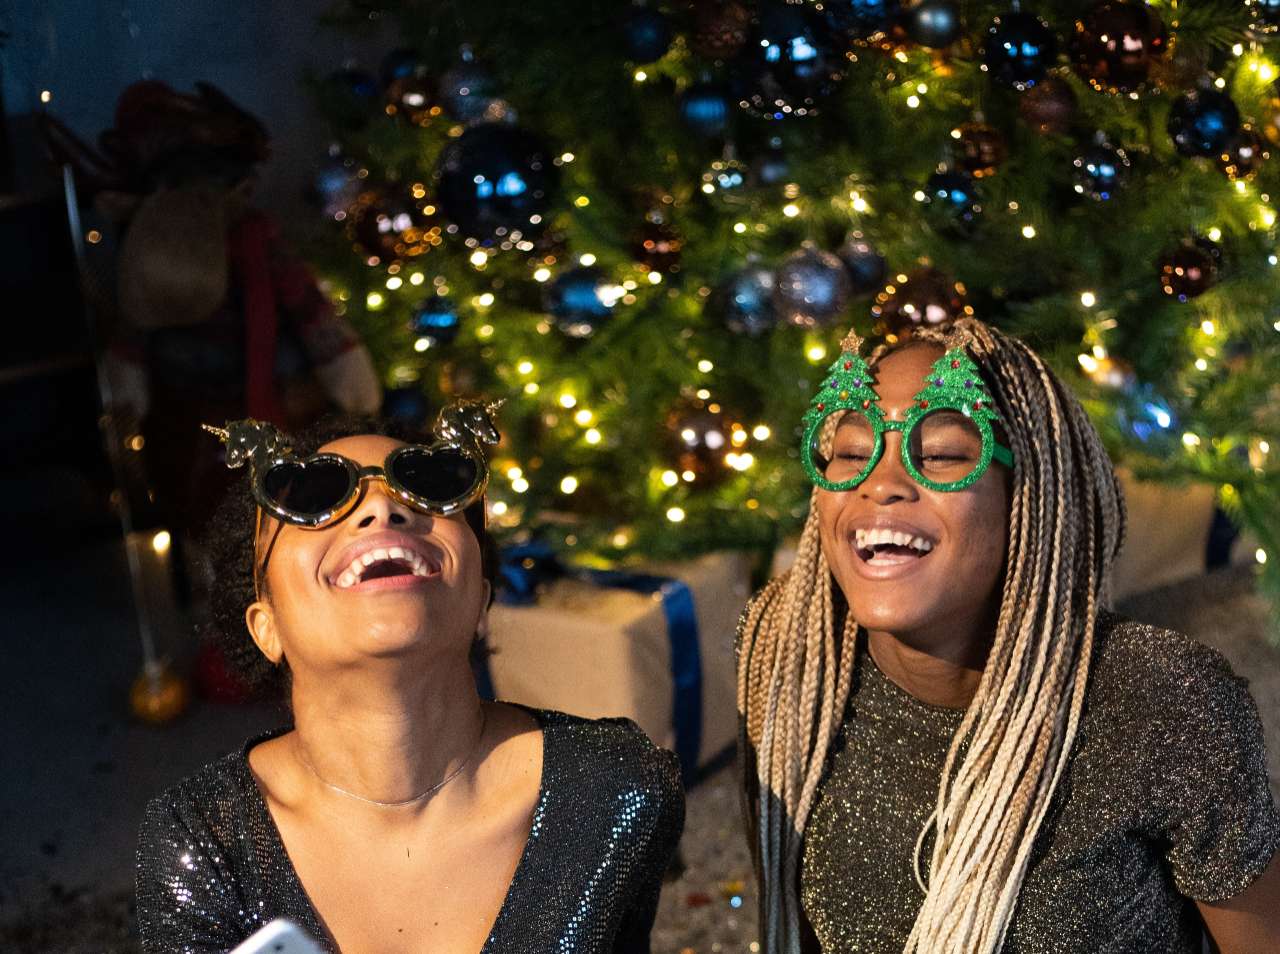 Two female friends in festive clothing laughing together